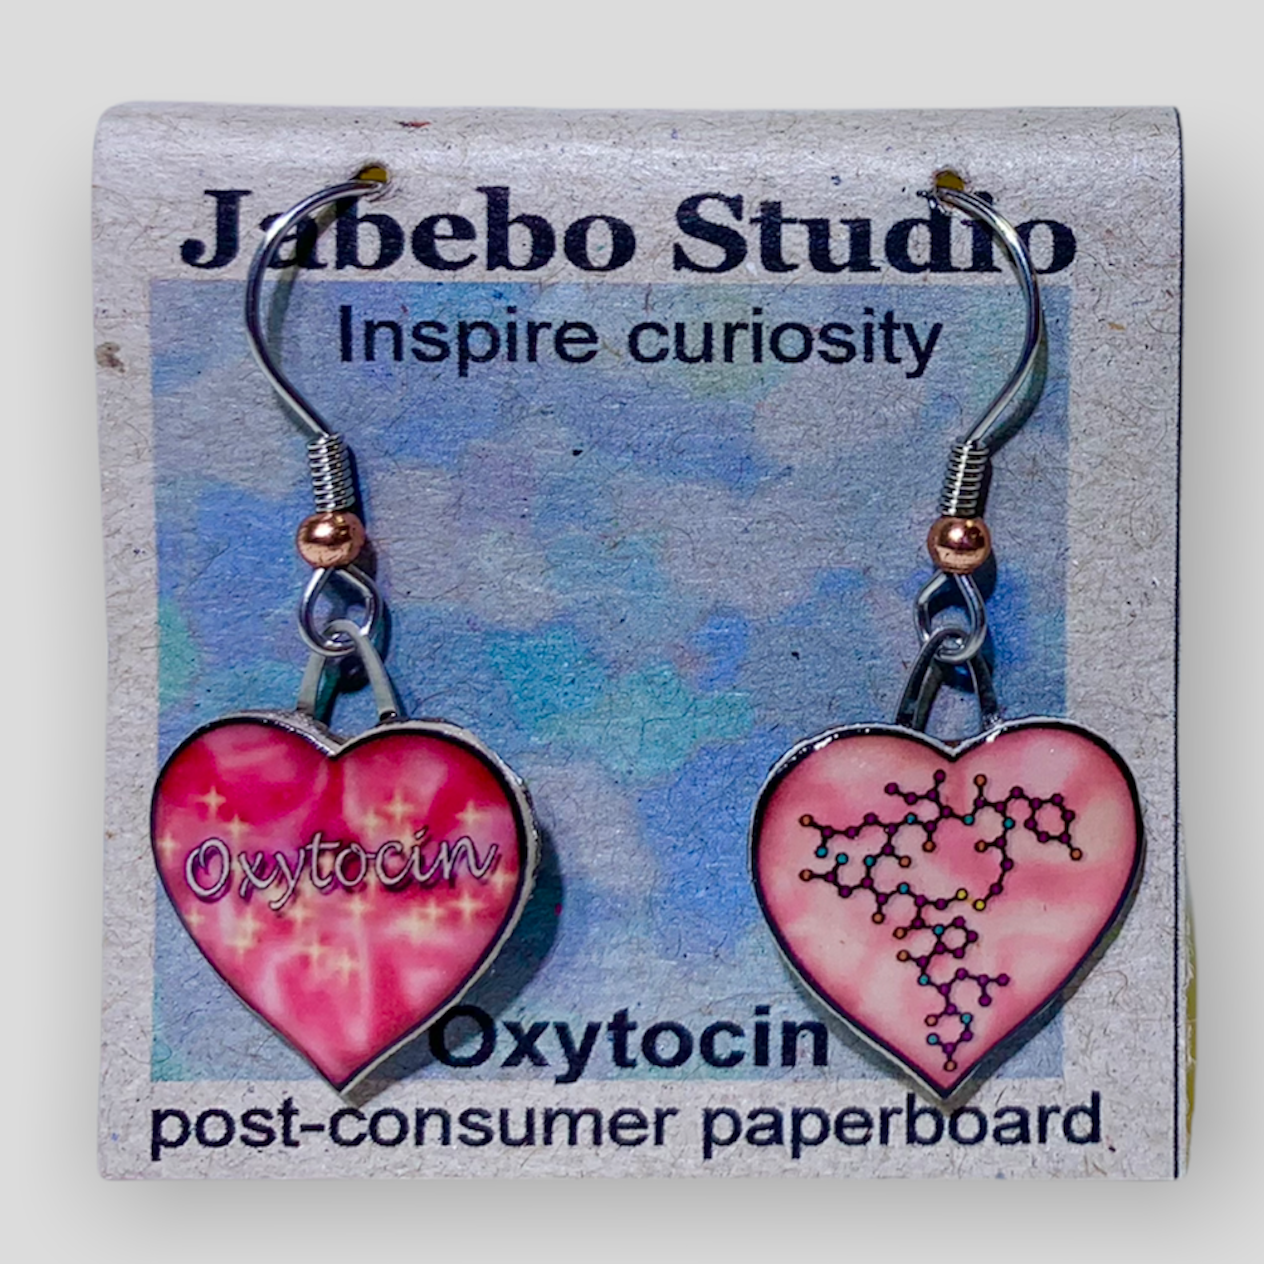 Picture shown is of 1 inch tall pair of earrings of Oxytocin.